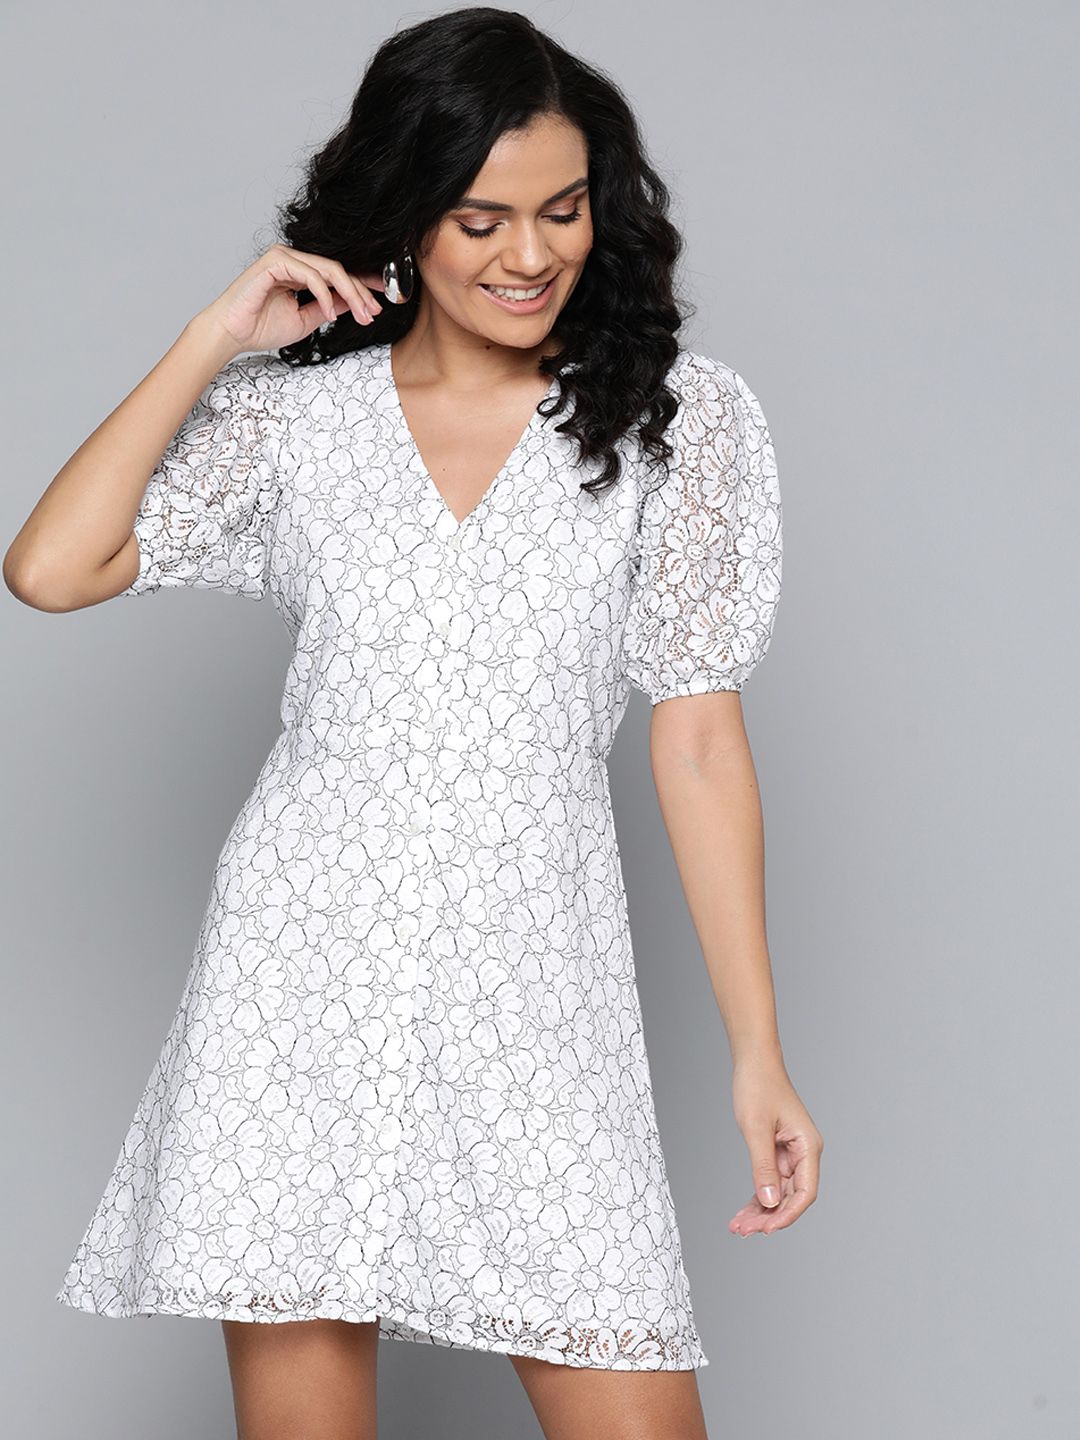 SASSAFRAS Women White & Black Floral Lace A-Line Dress Price in India